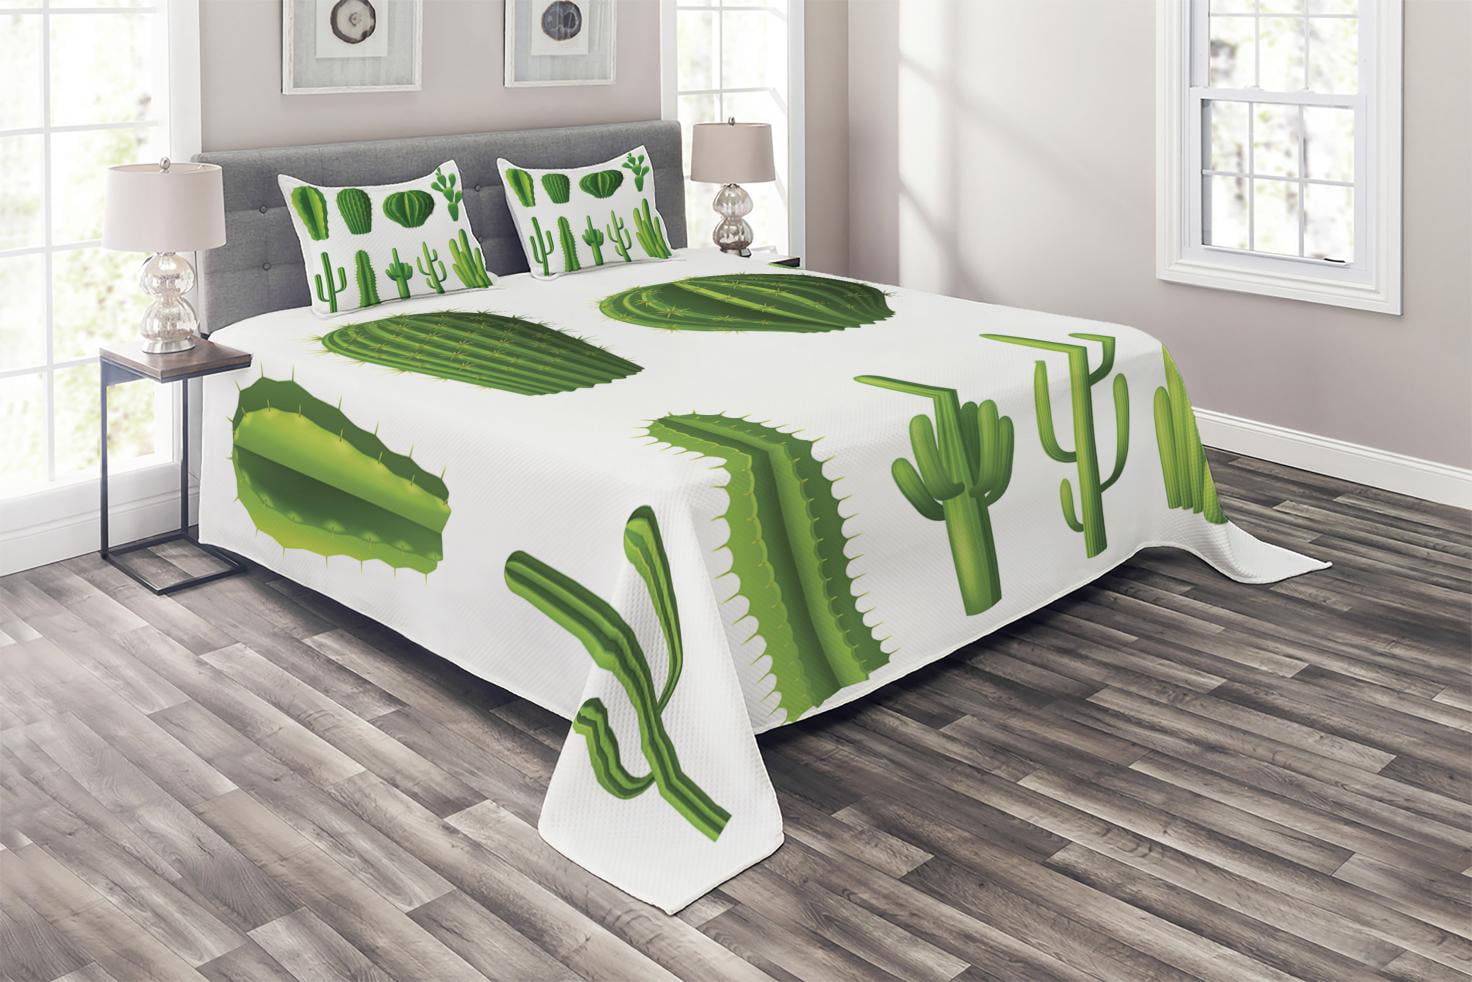 Details about   Desert Quilted Coverlet & Pillow Shams Set Mexican Cartoon Cactus Print 